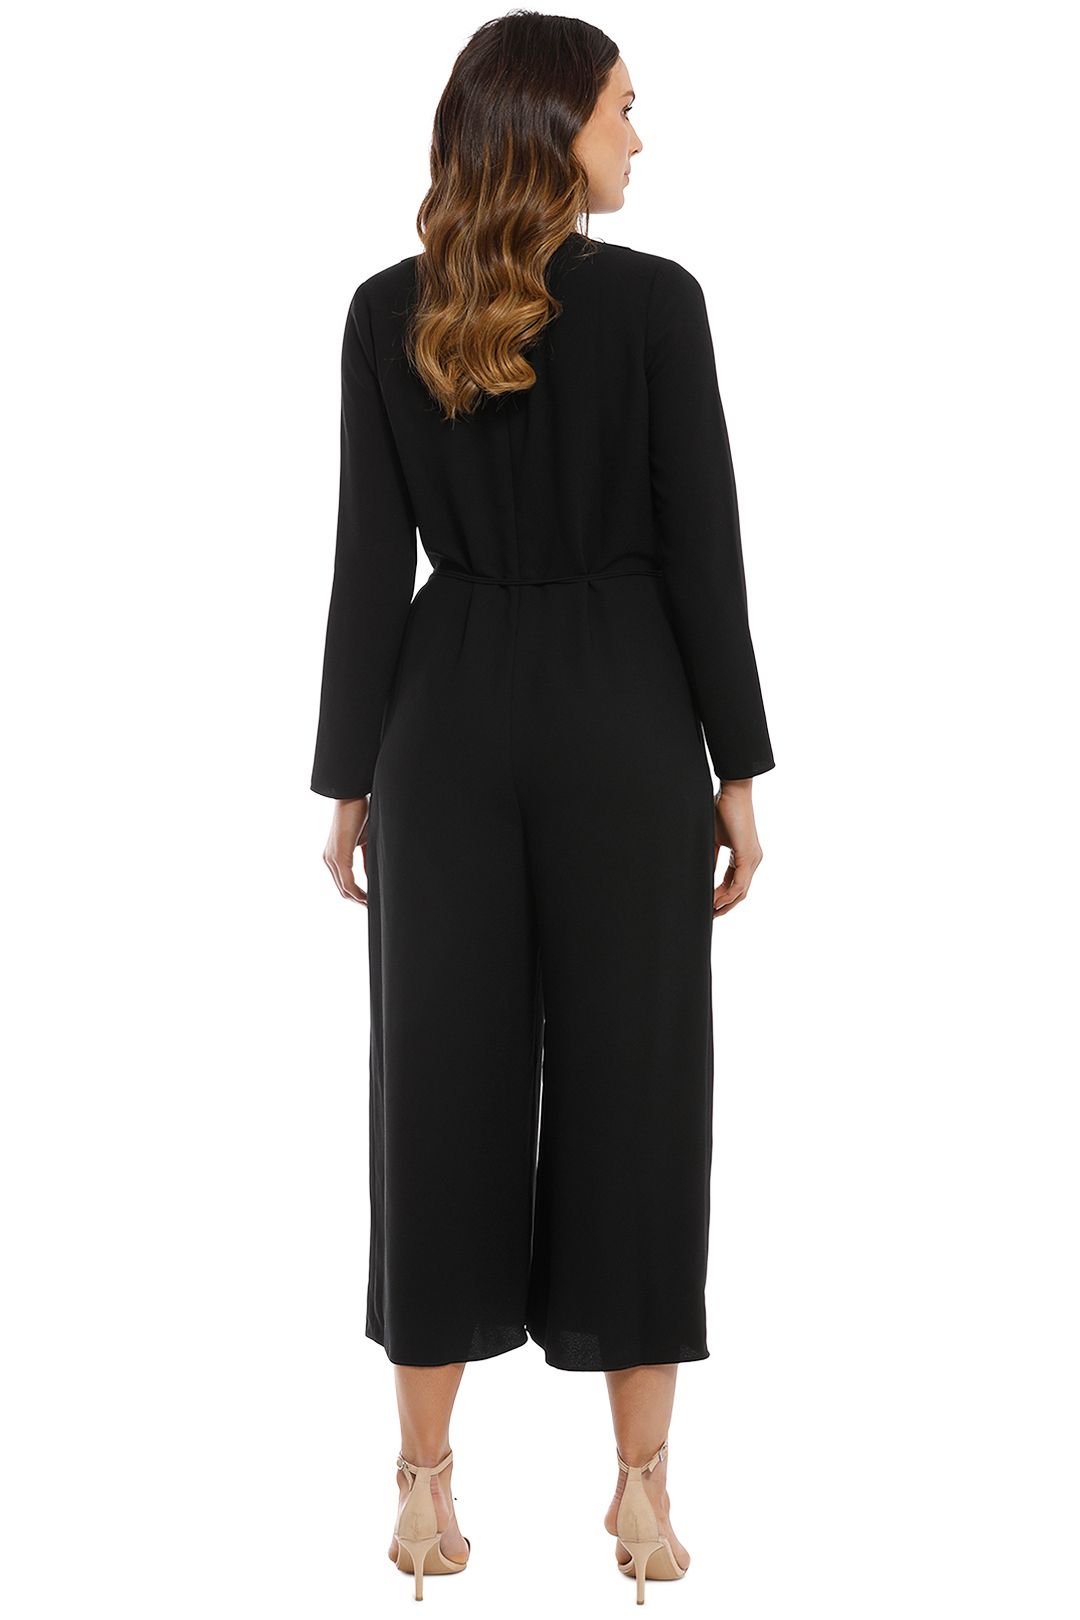 Cropped Jumpsuit in Black by Alexander Wang for Hire